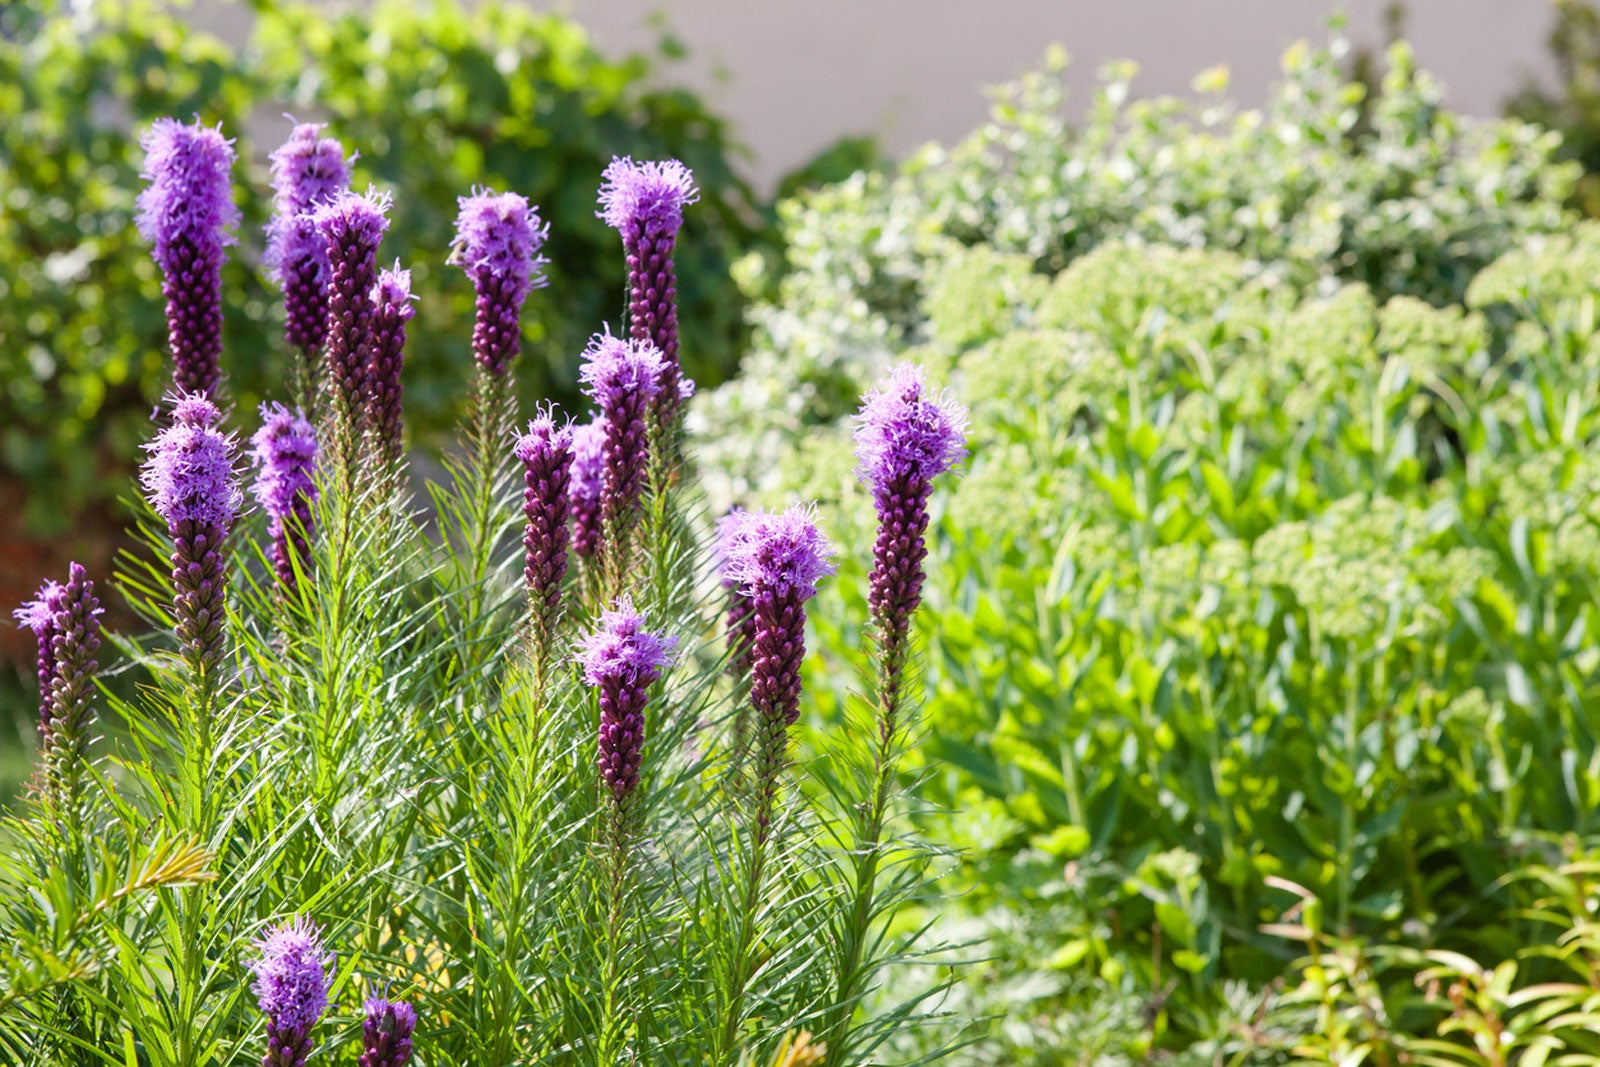 Liatris Care - Information On Growing And Caring For Liatris Plants